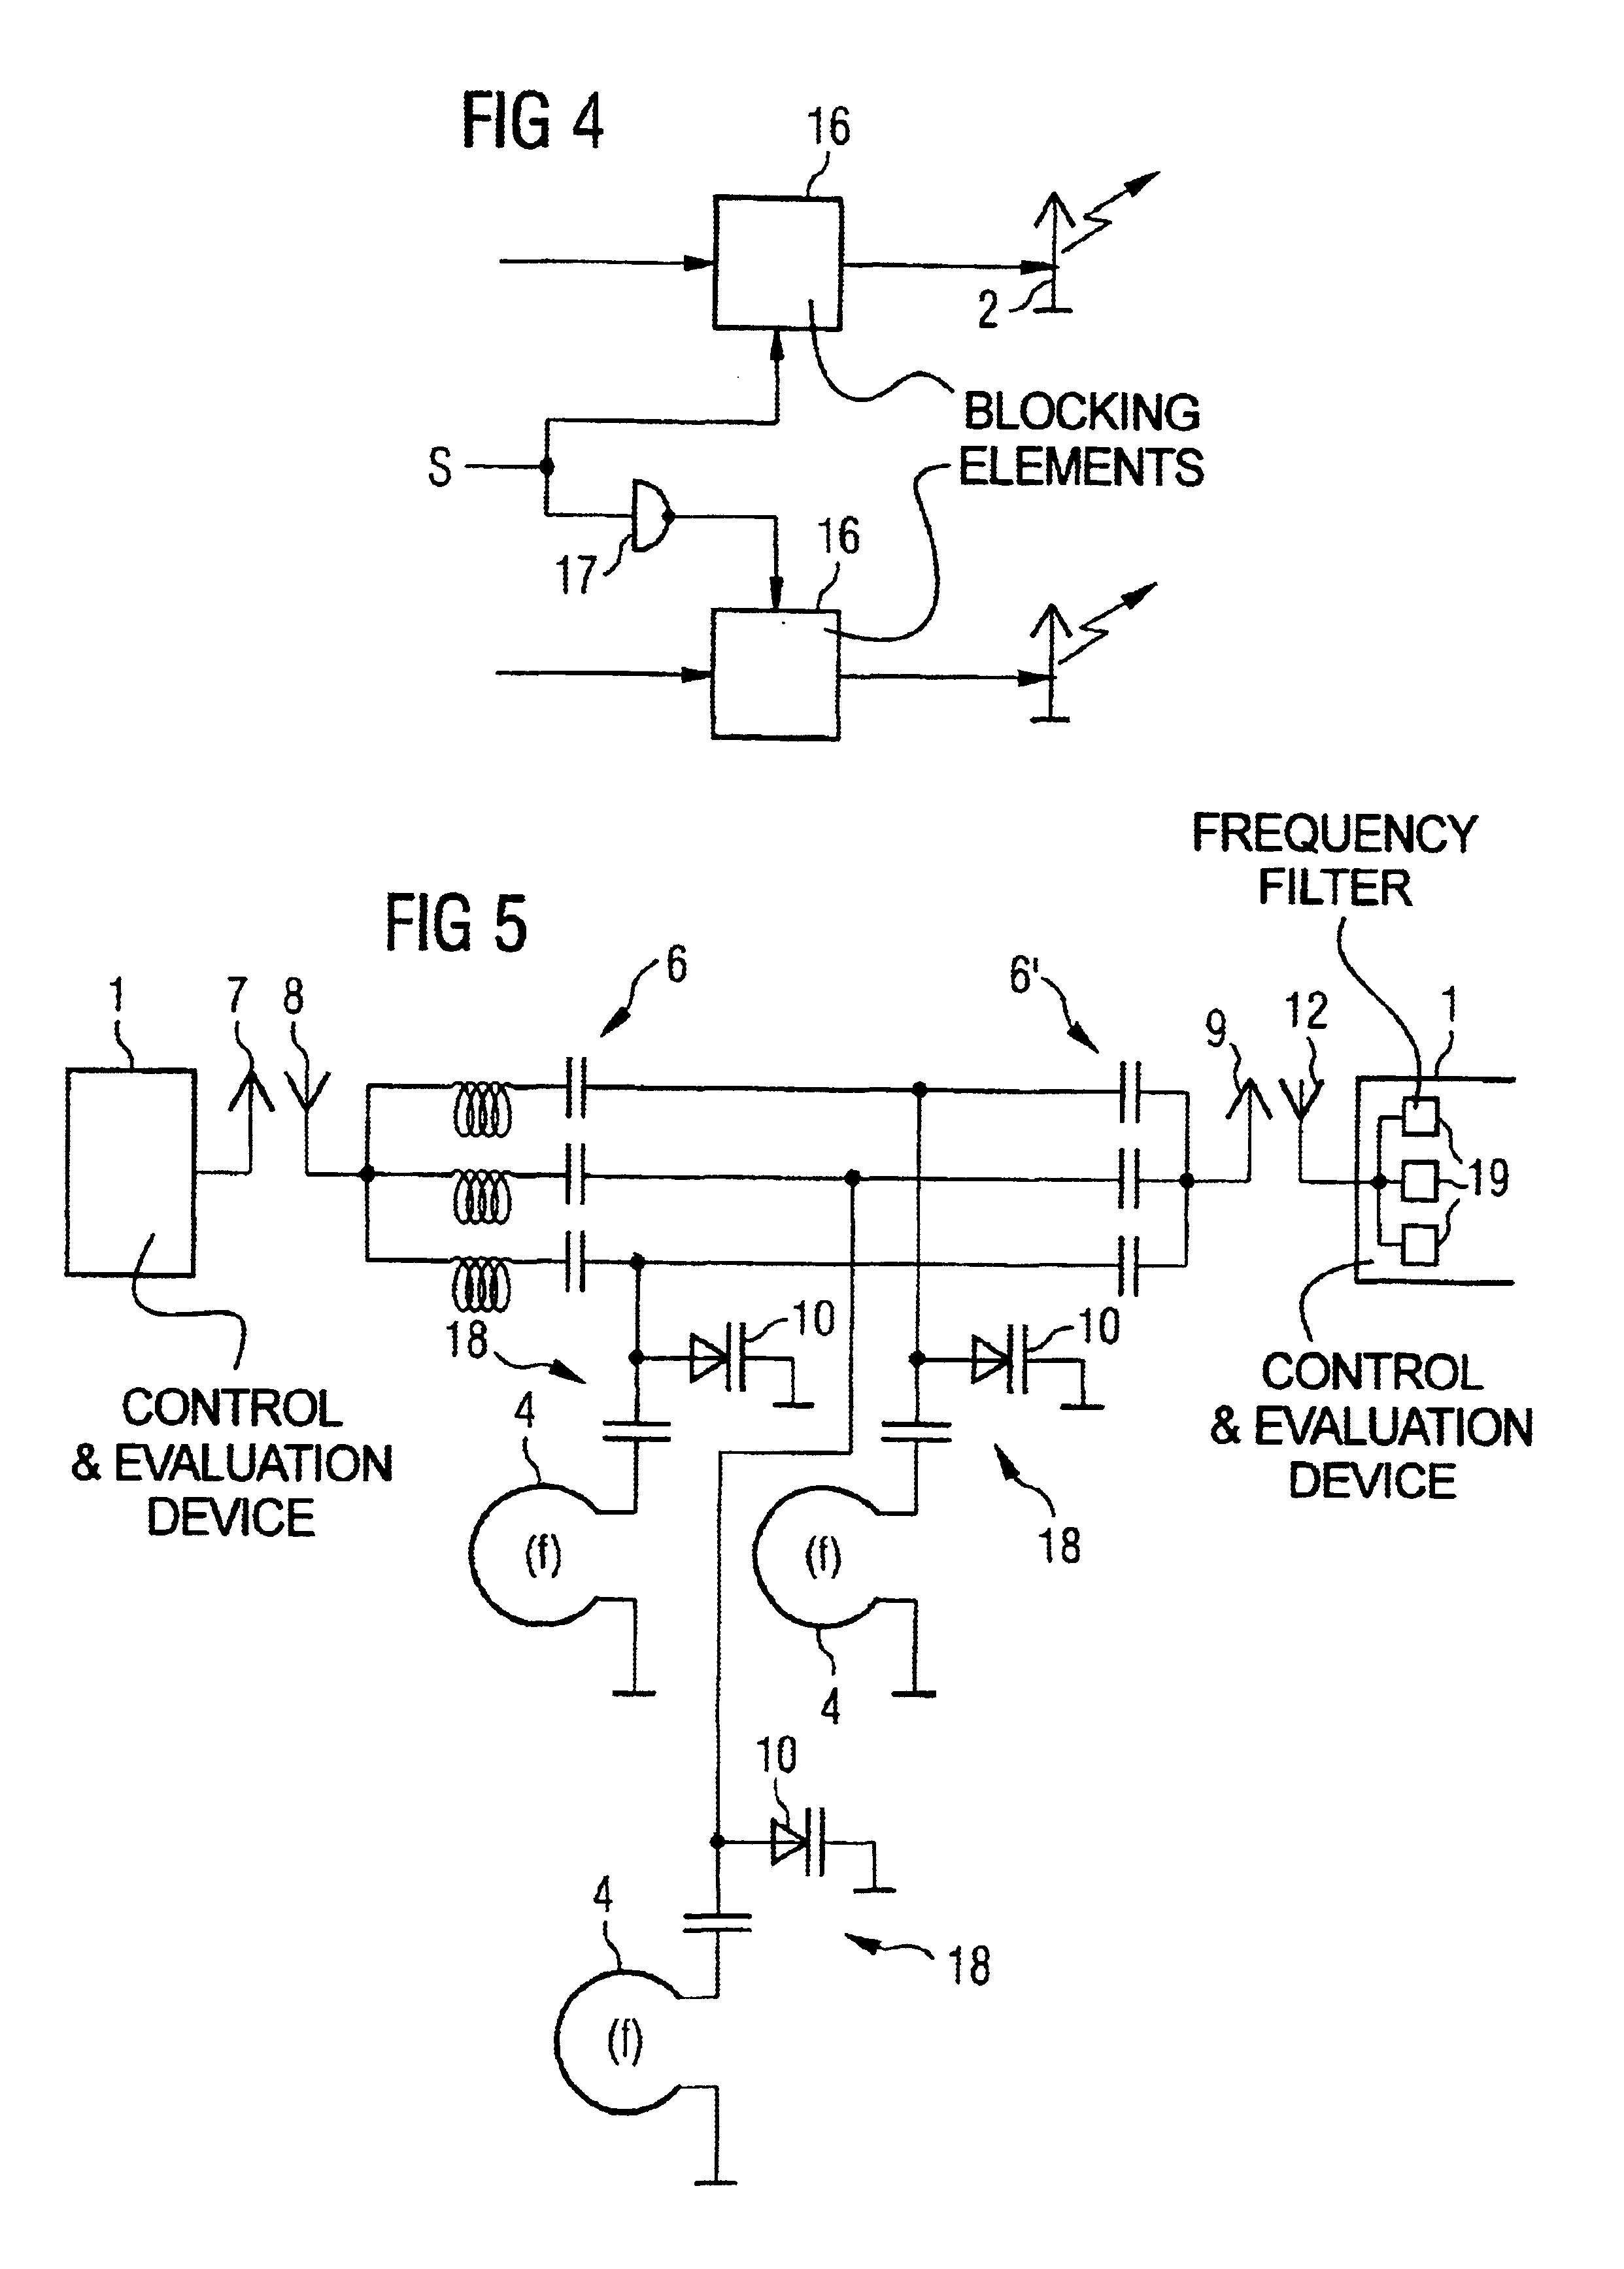 Method for communicating a magnetic resonance signal, and reception arrangement and magnetic resonance system operable in accord therewith